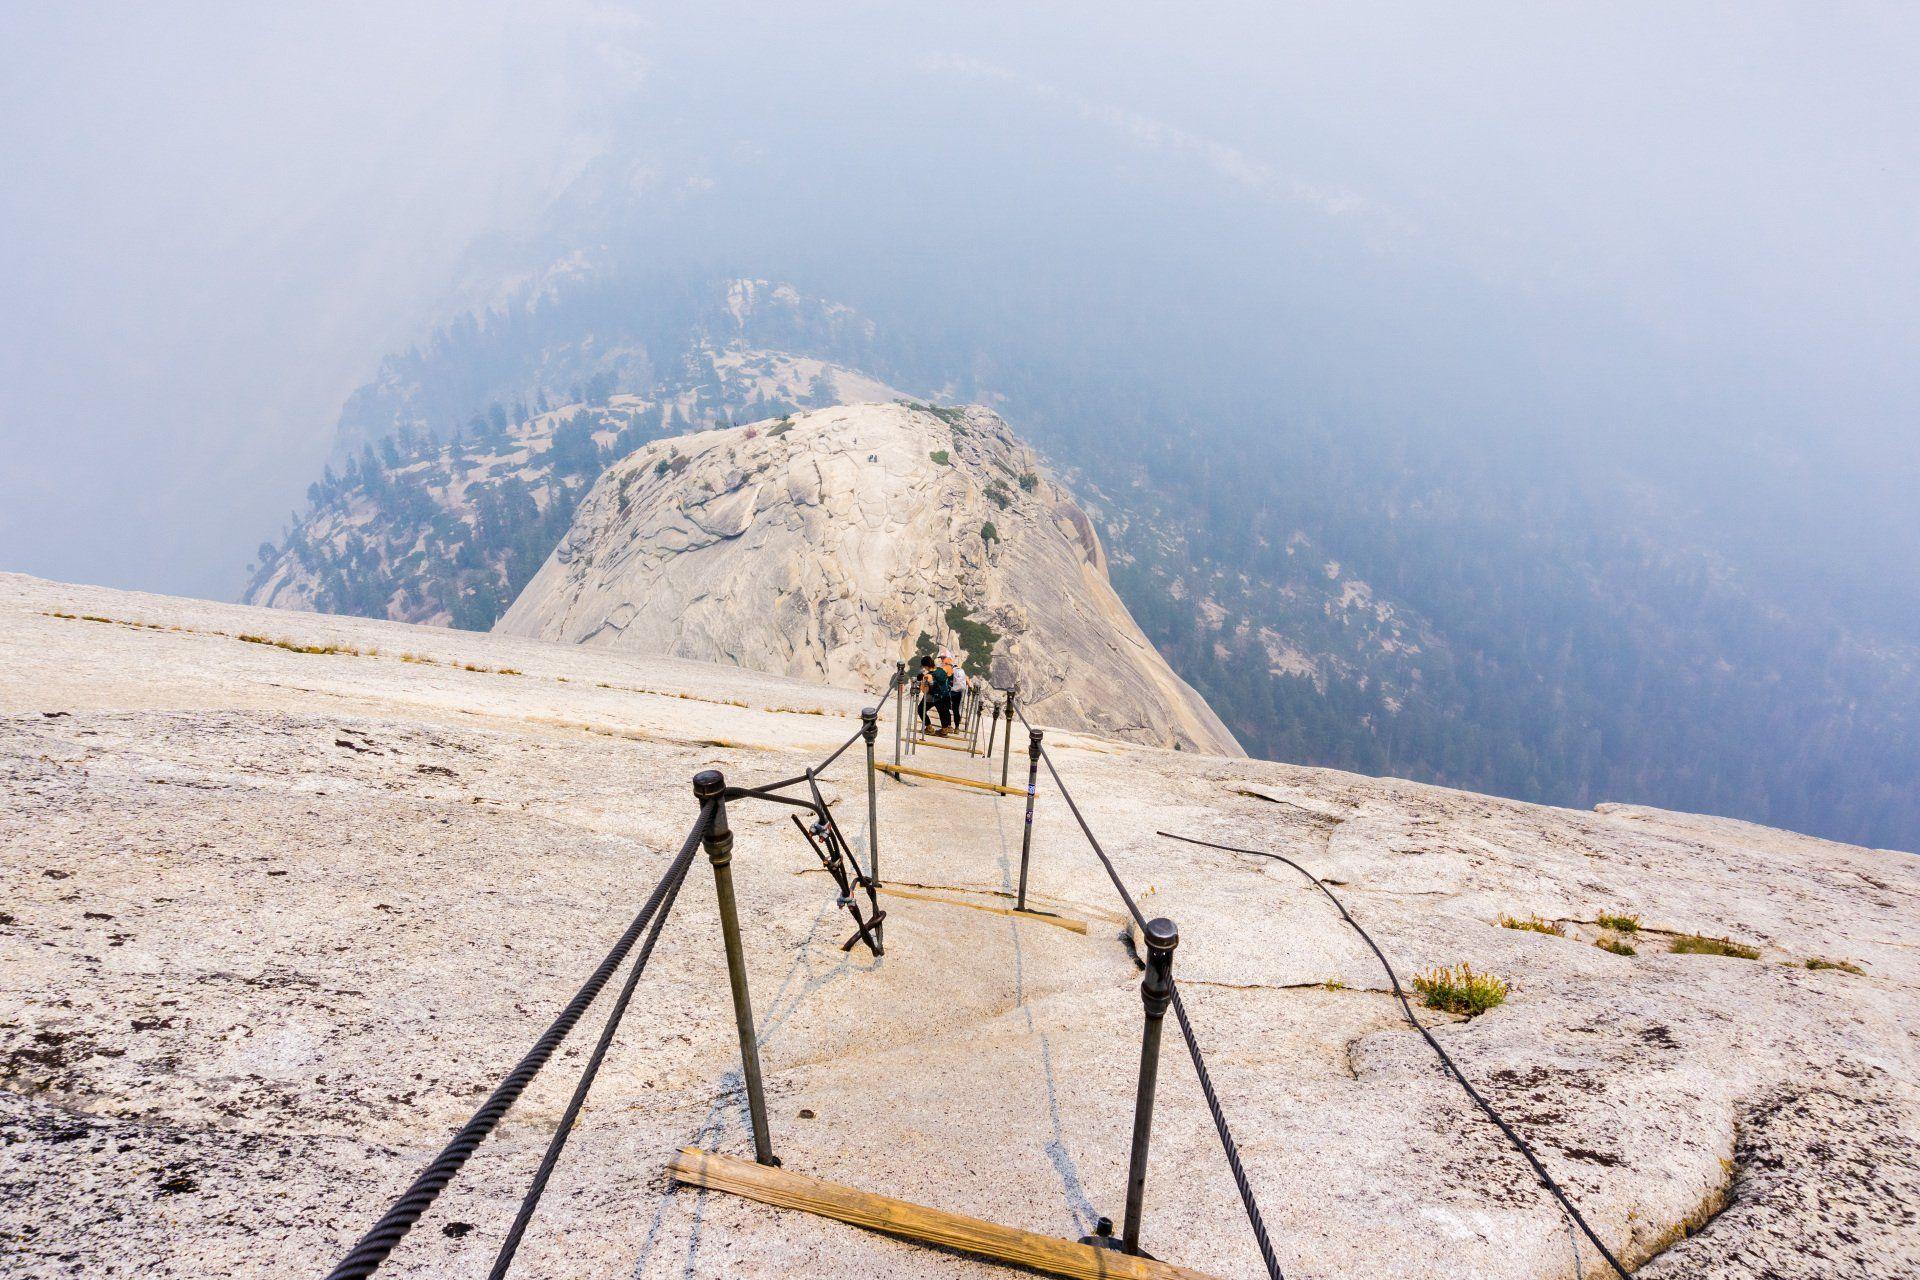 The very daunting view coming down Half Dome